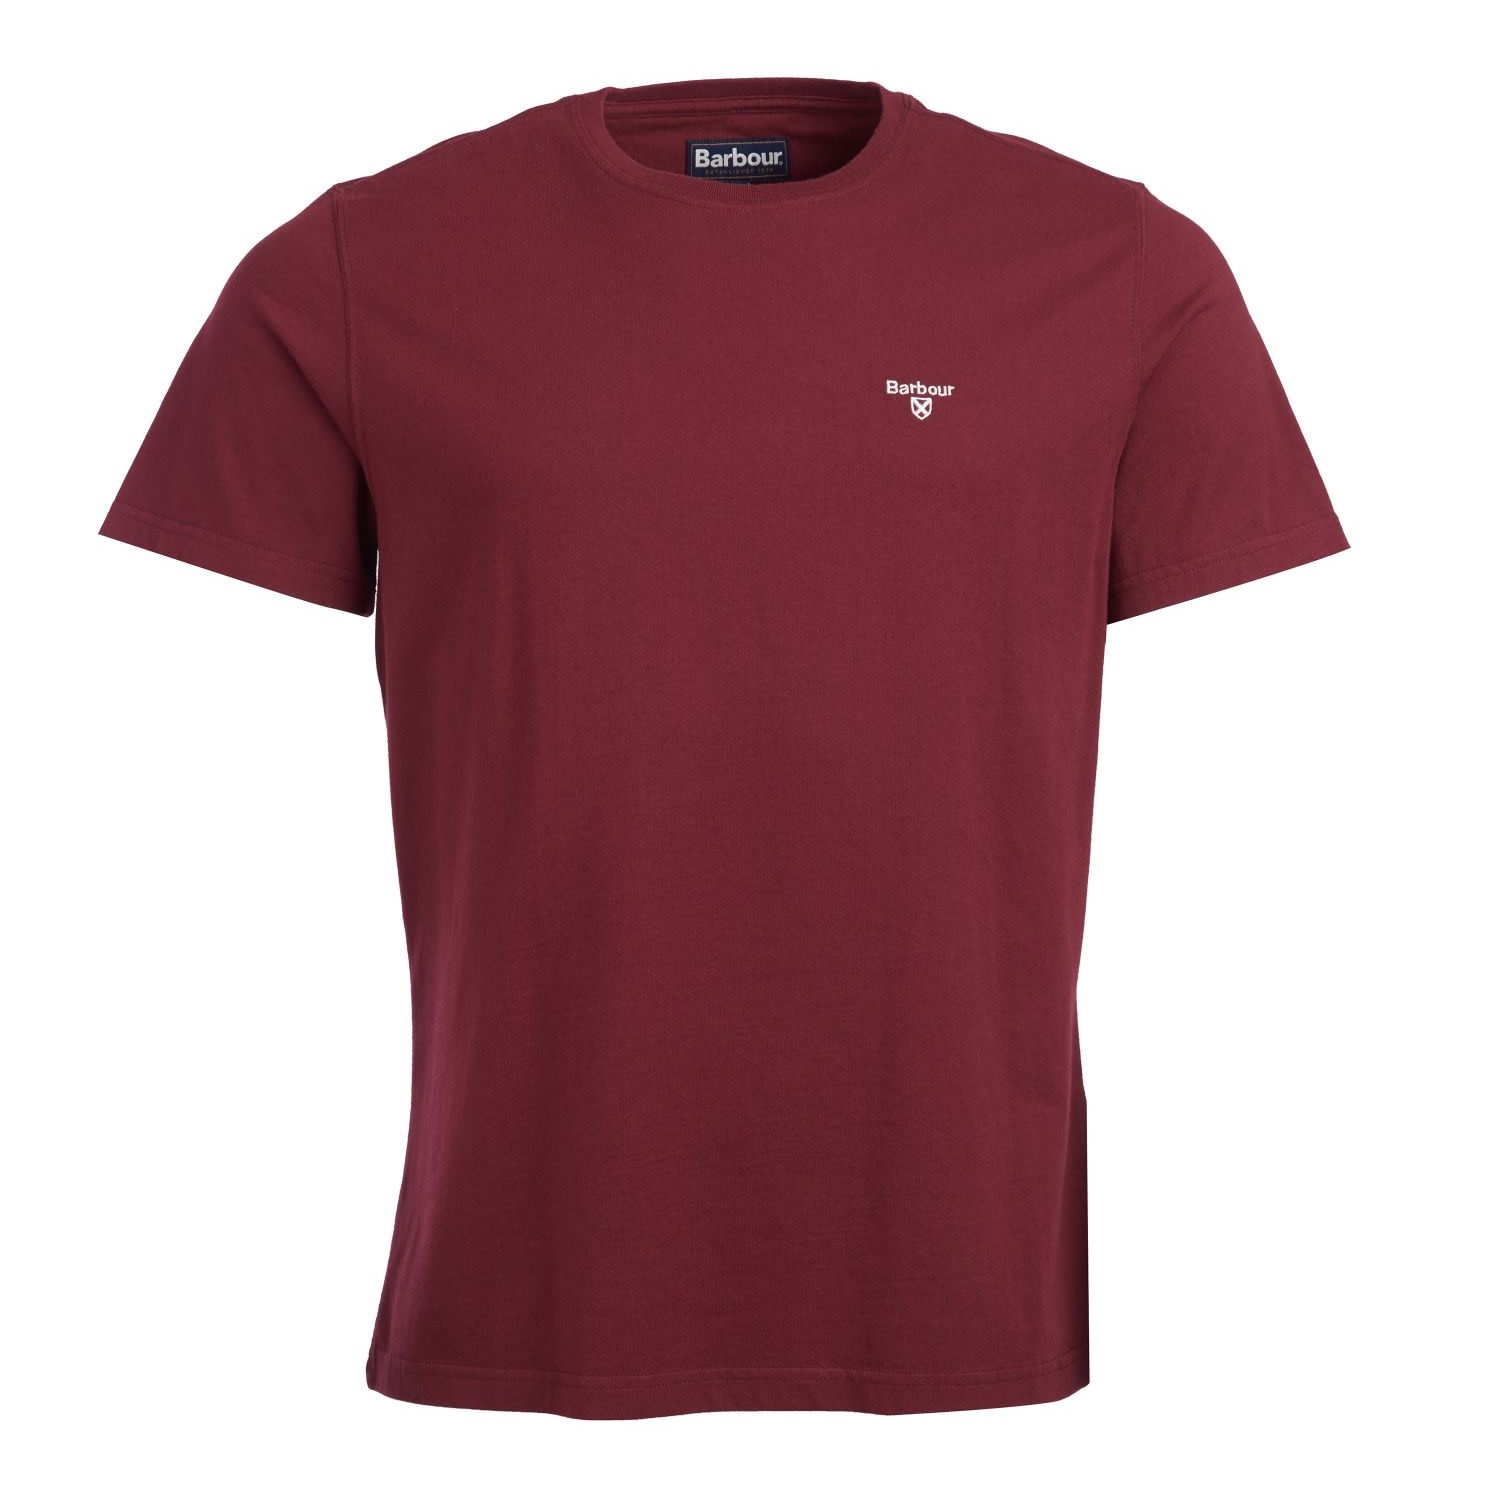 Barbour Men’s Sports Tee Ruby